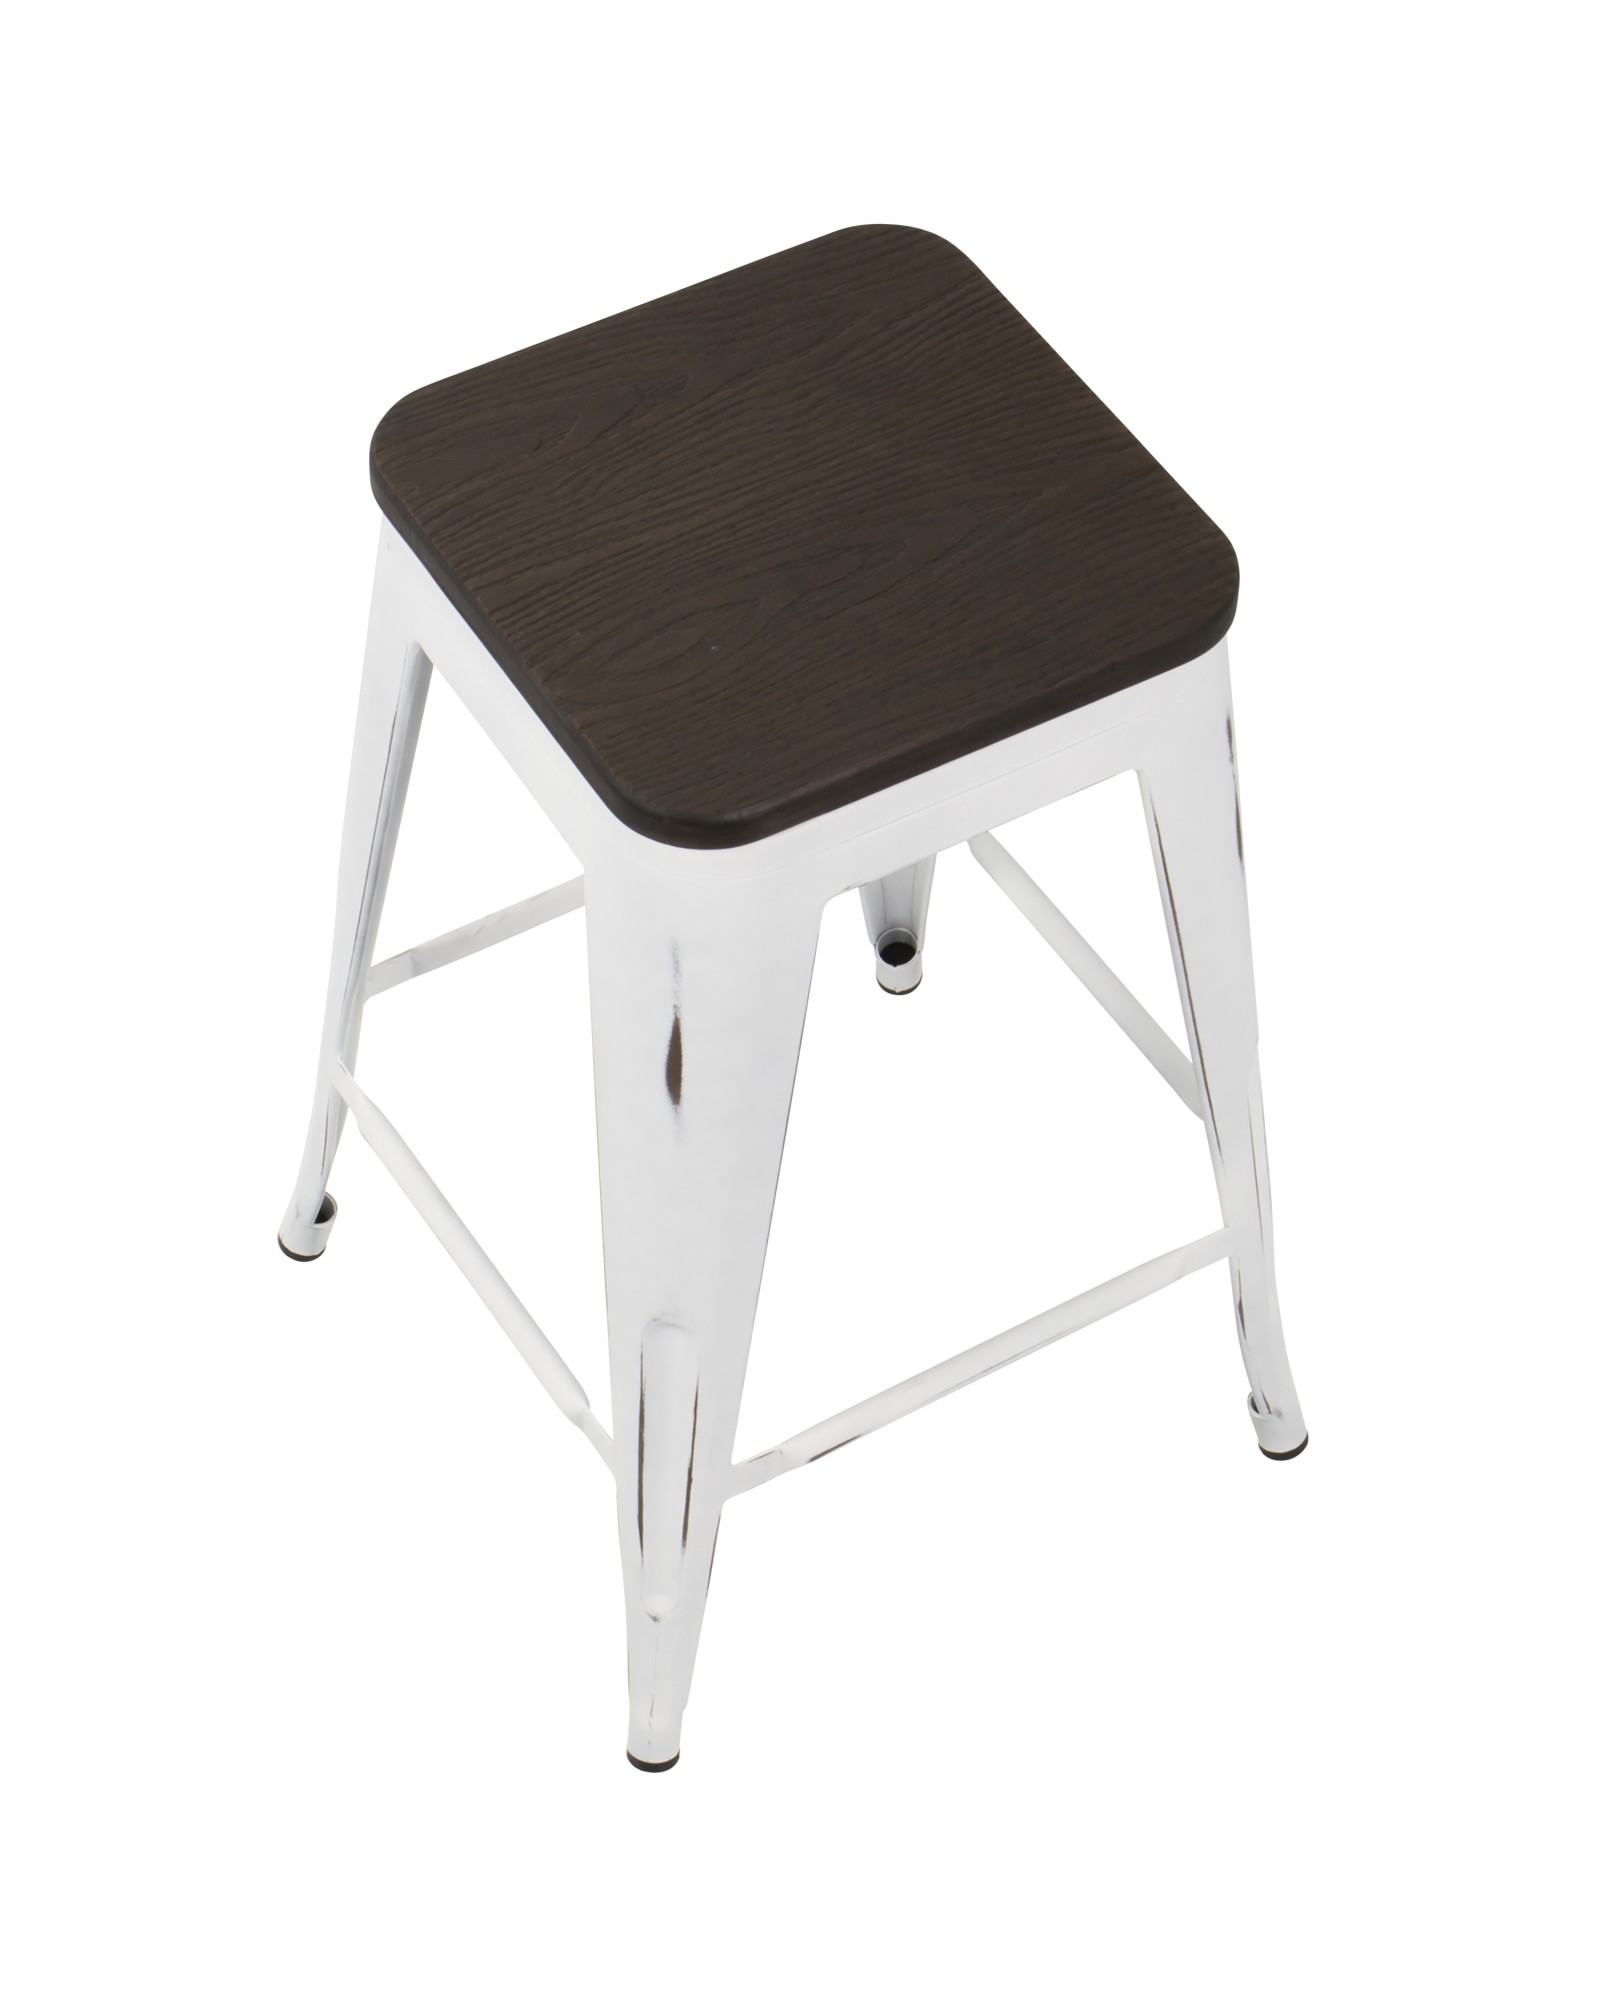 Oregon Industrial Stackable Counter Stool in Vintage White and Espresso - Set of 2